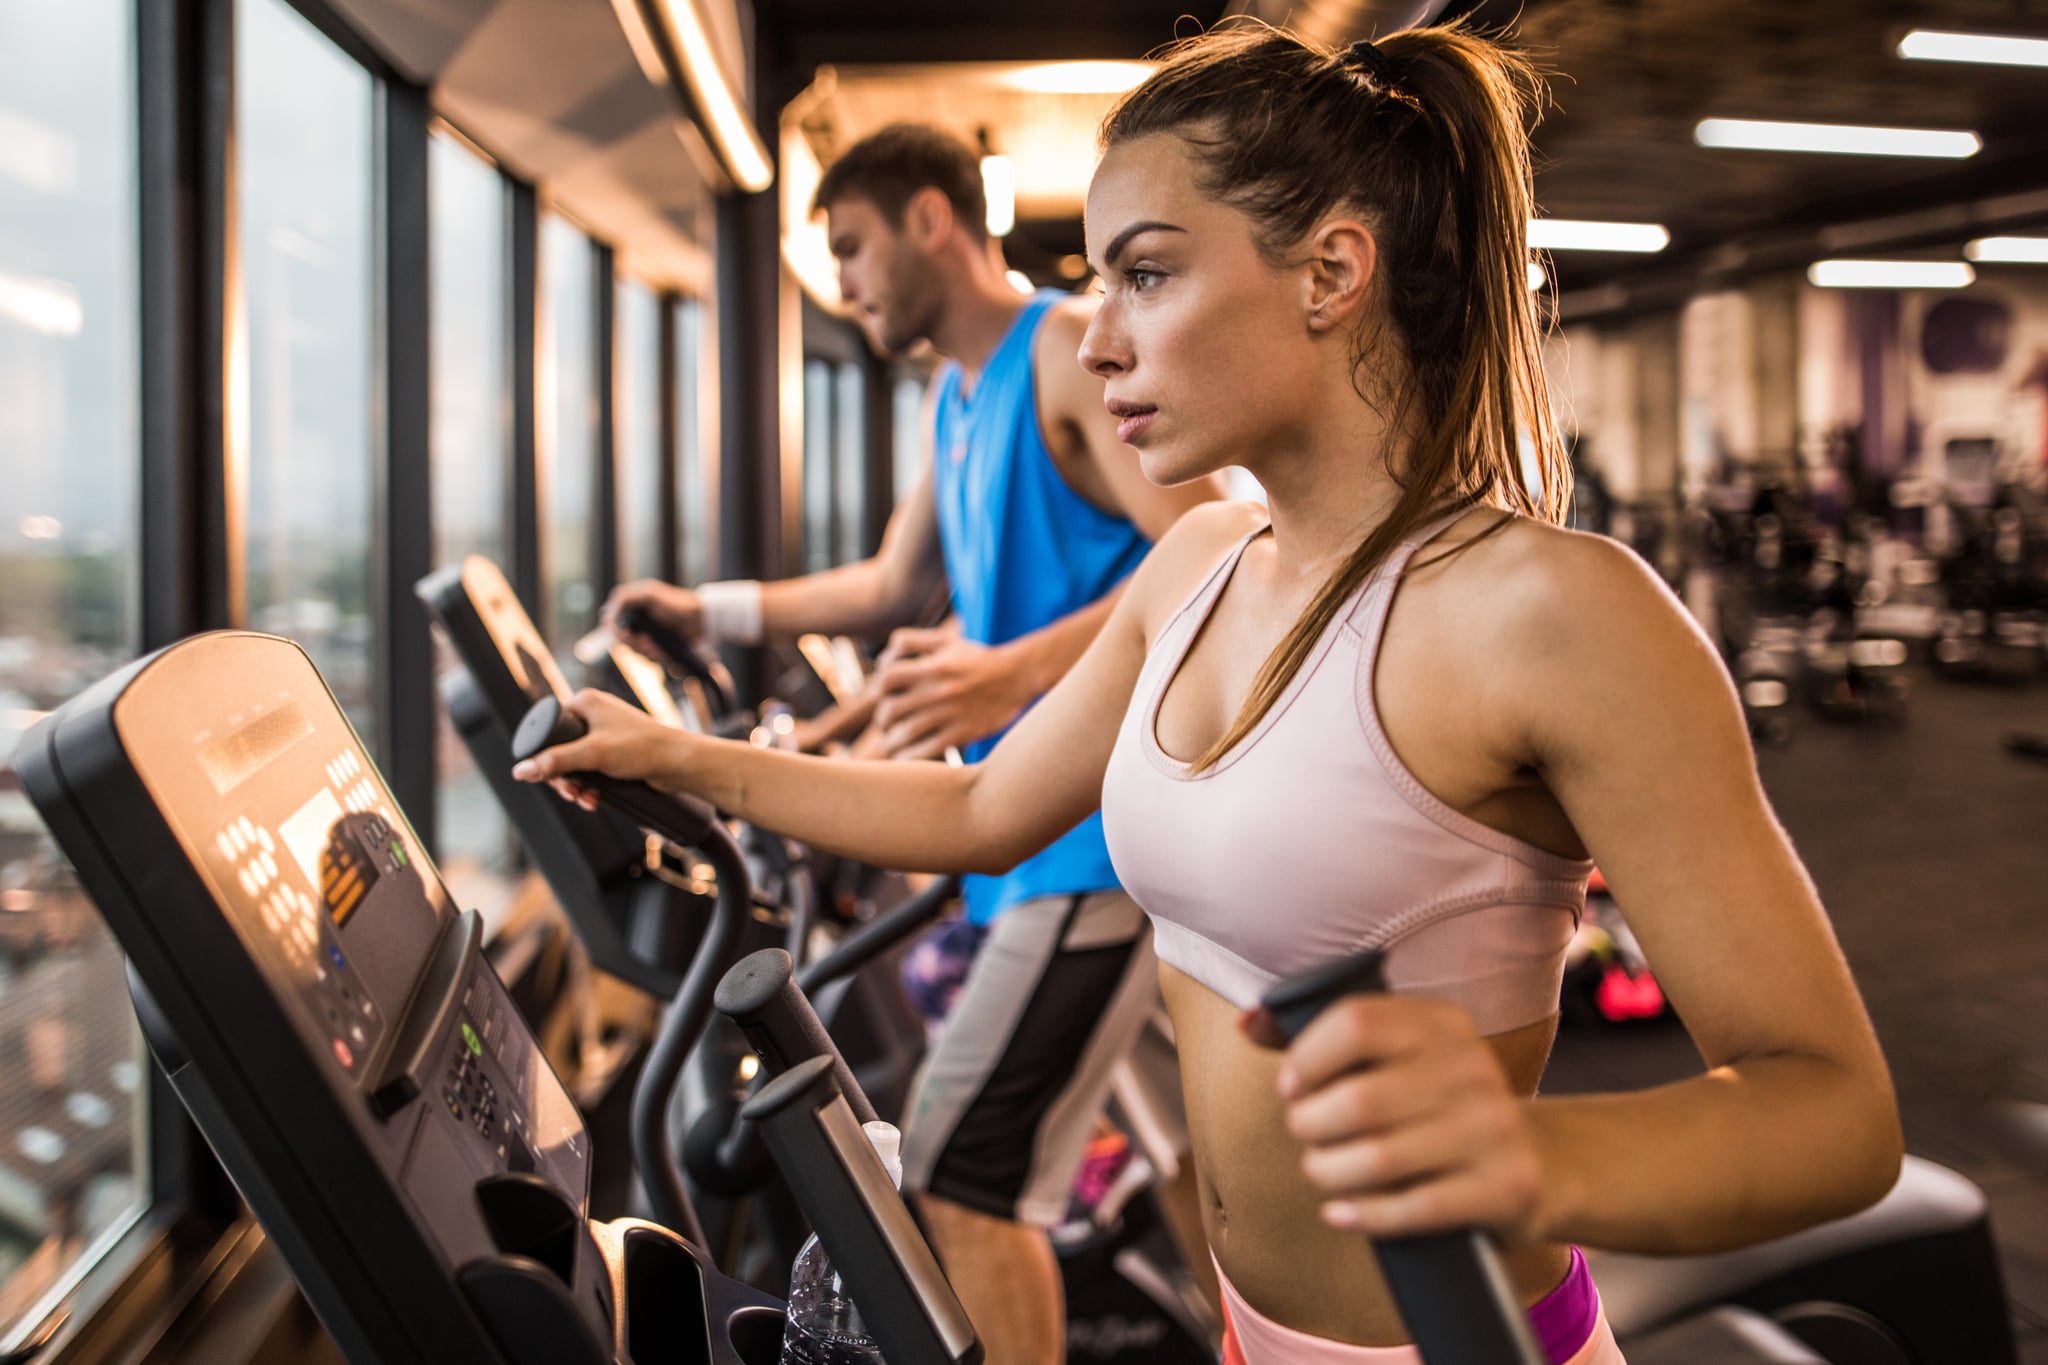 Young female athlete having a sports training on a cross trainer in a health club, while man is in the background.